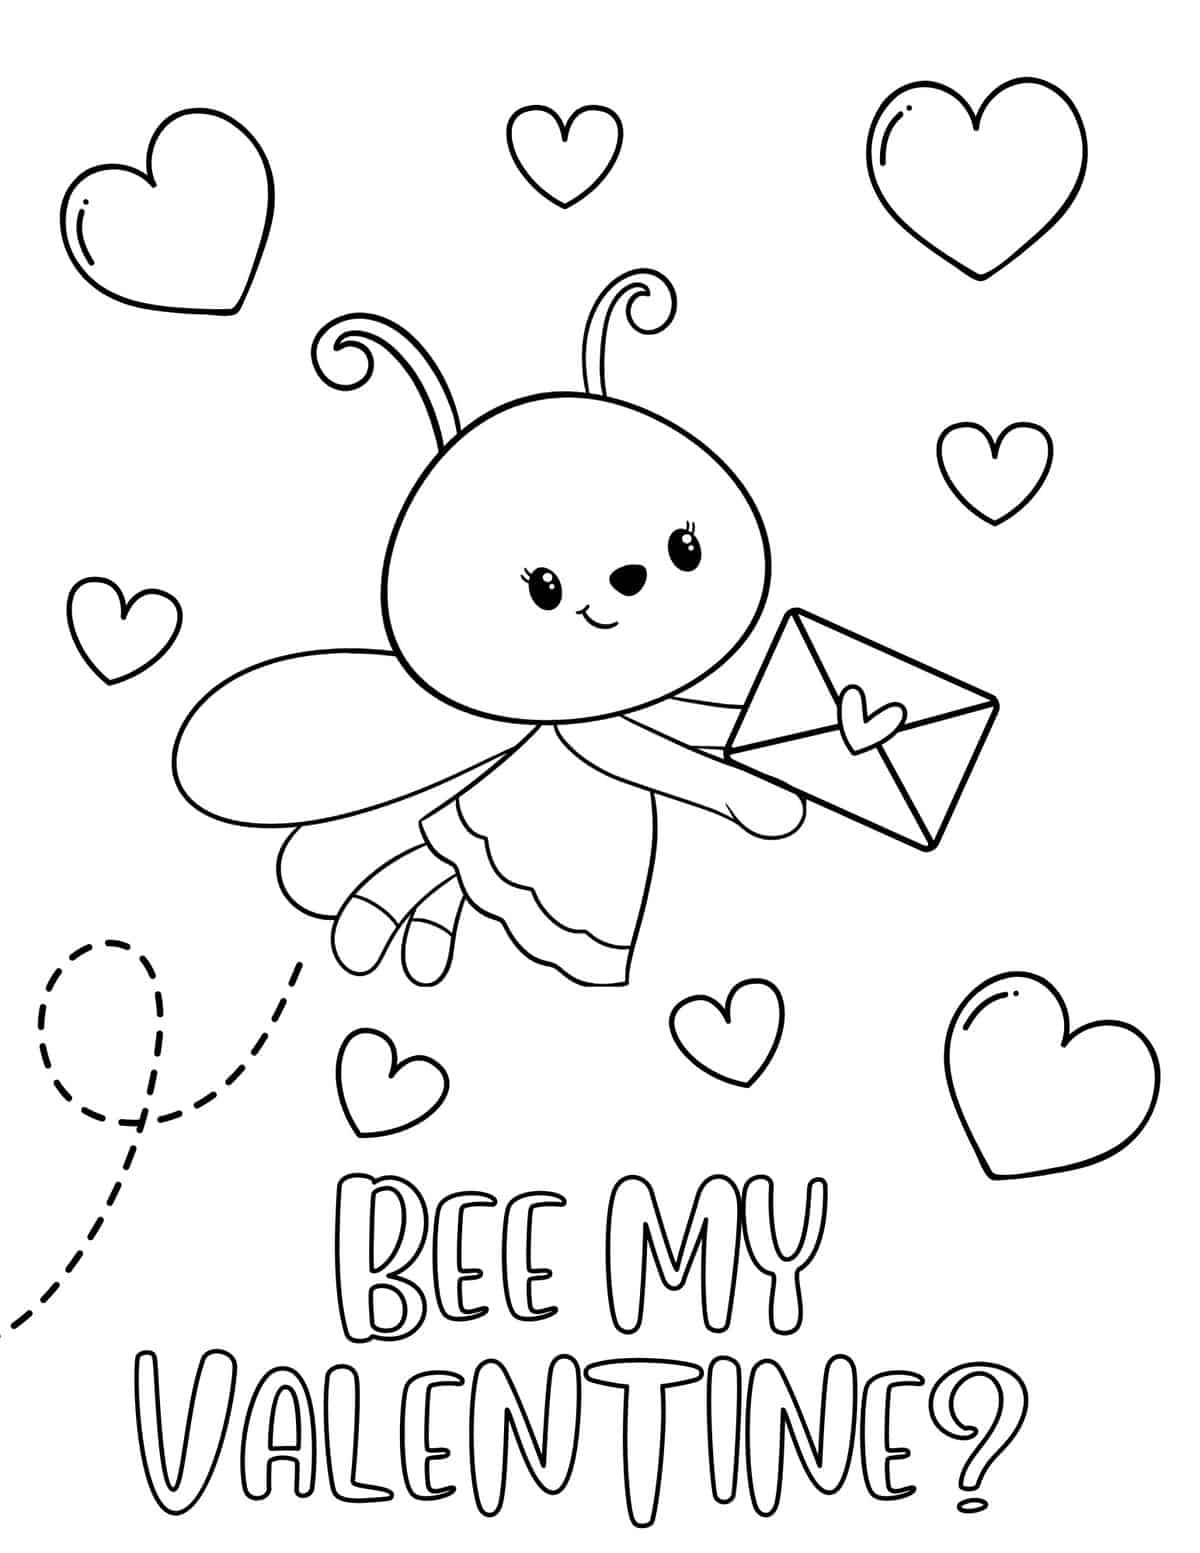 Discover 77  newest valentine coloring pages free to print and